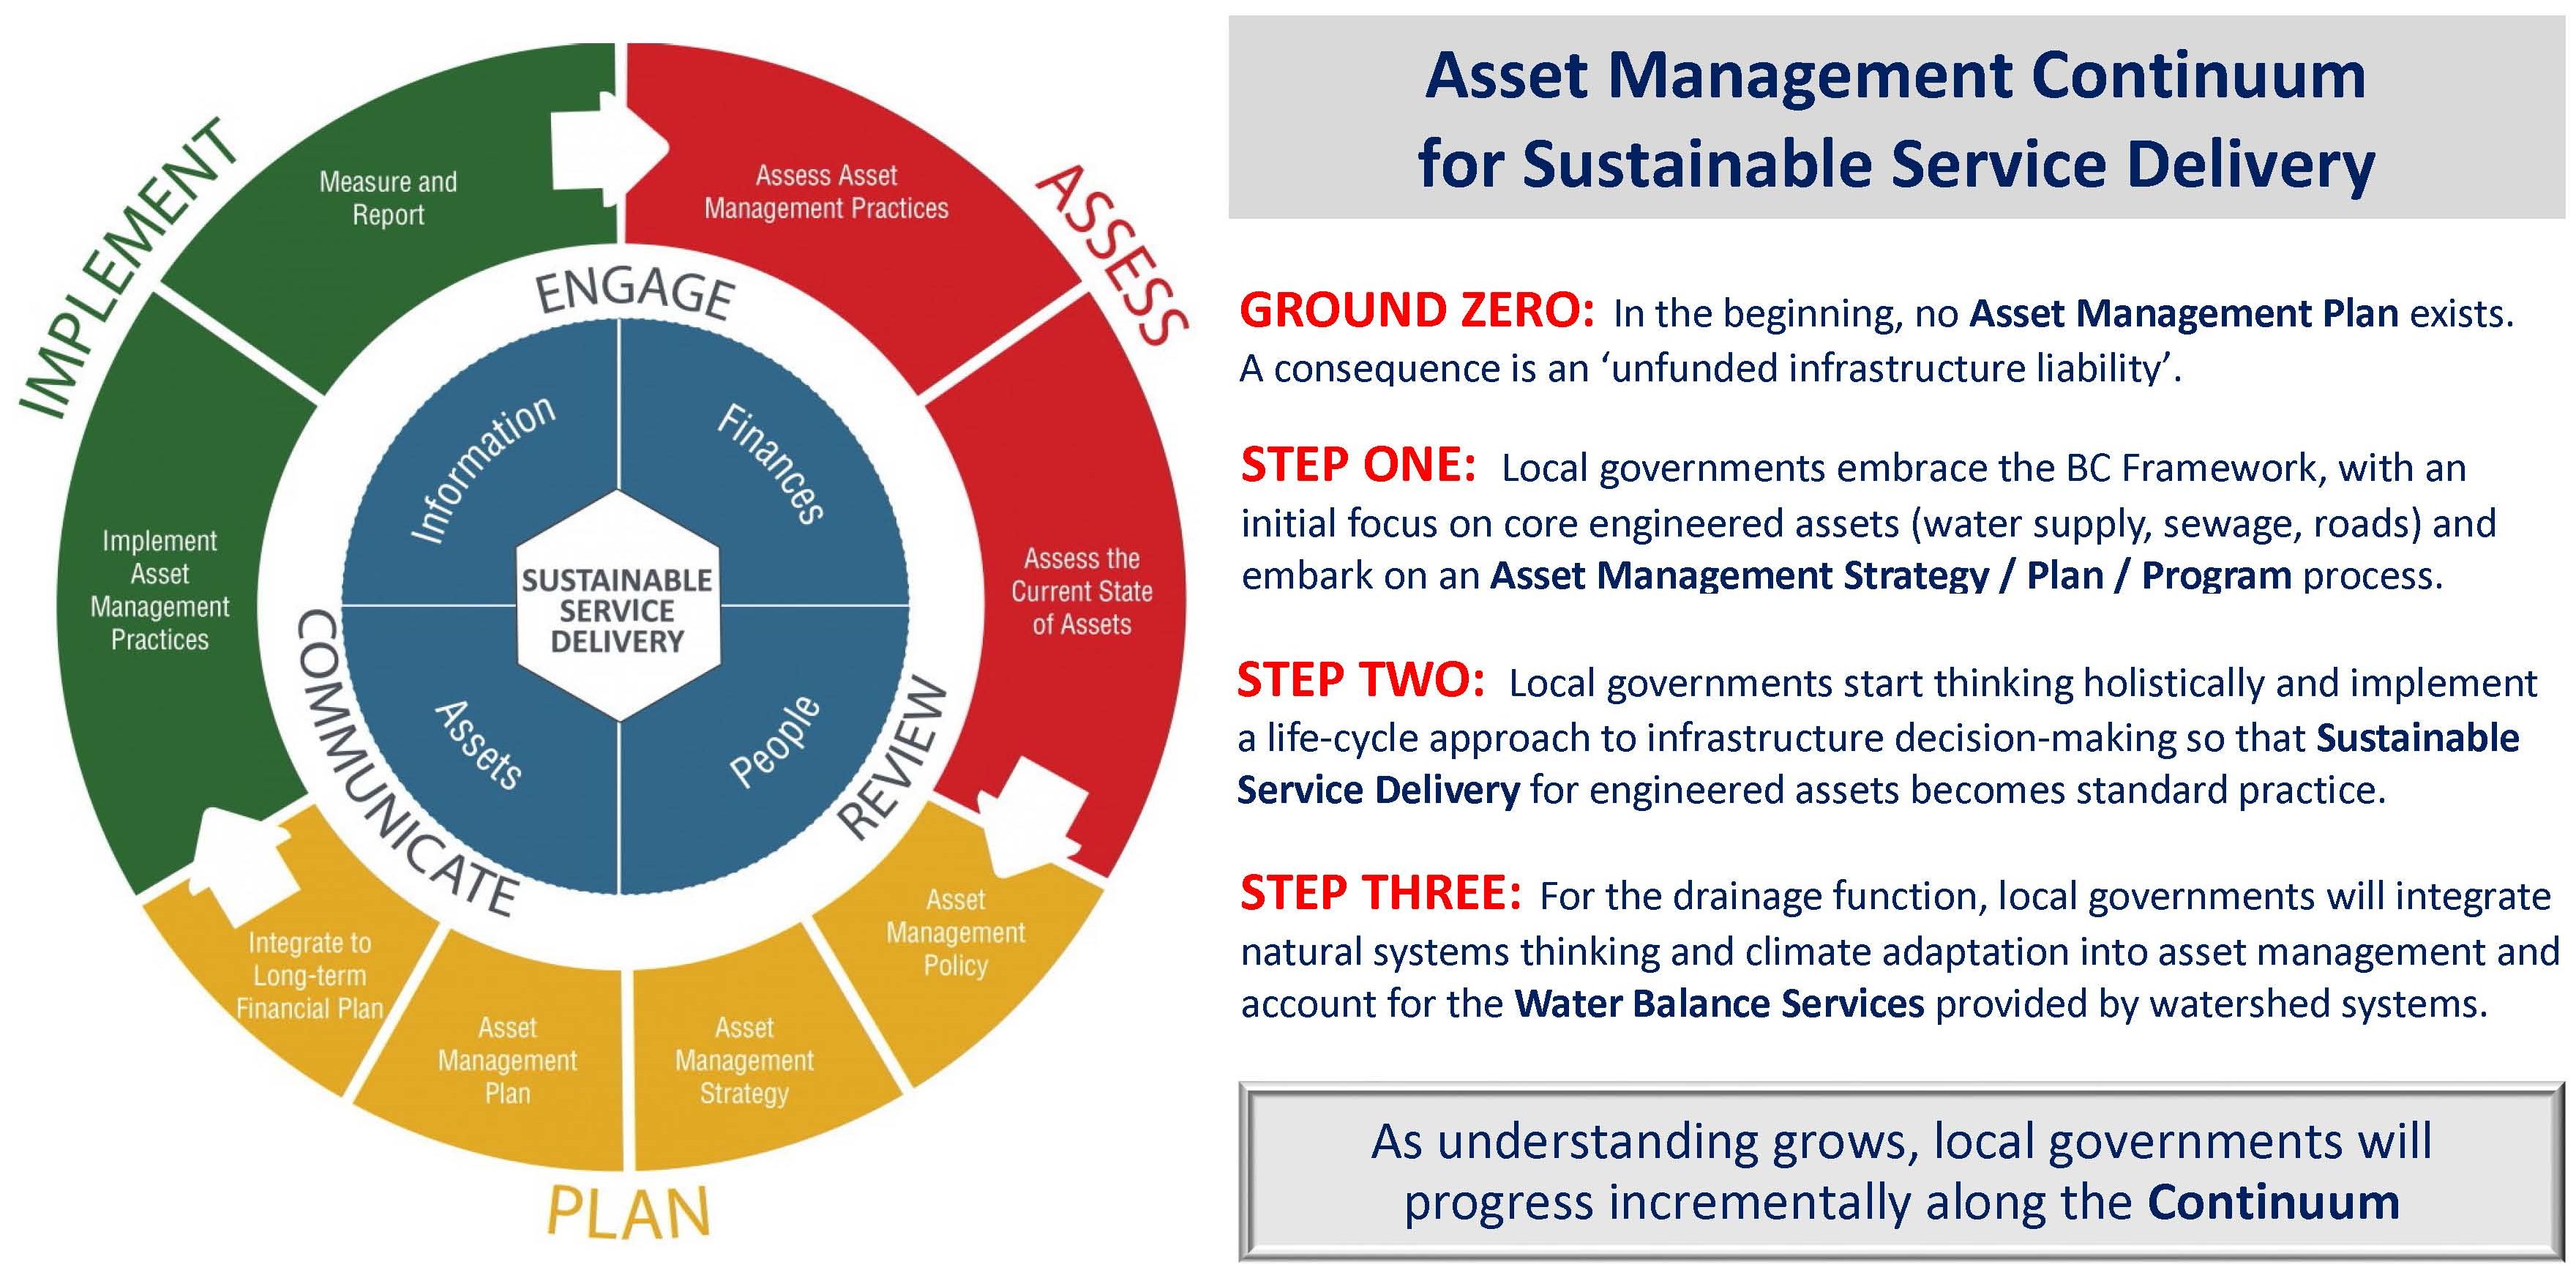 SUSTAINABLE WATERSHED SYSTEMS, THROUGH ASSET MANAGEMENT Governments of